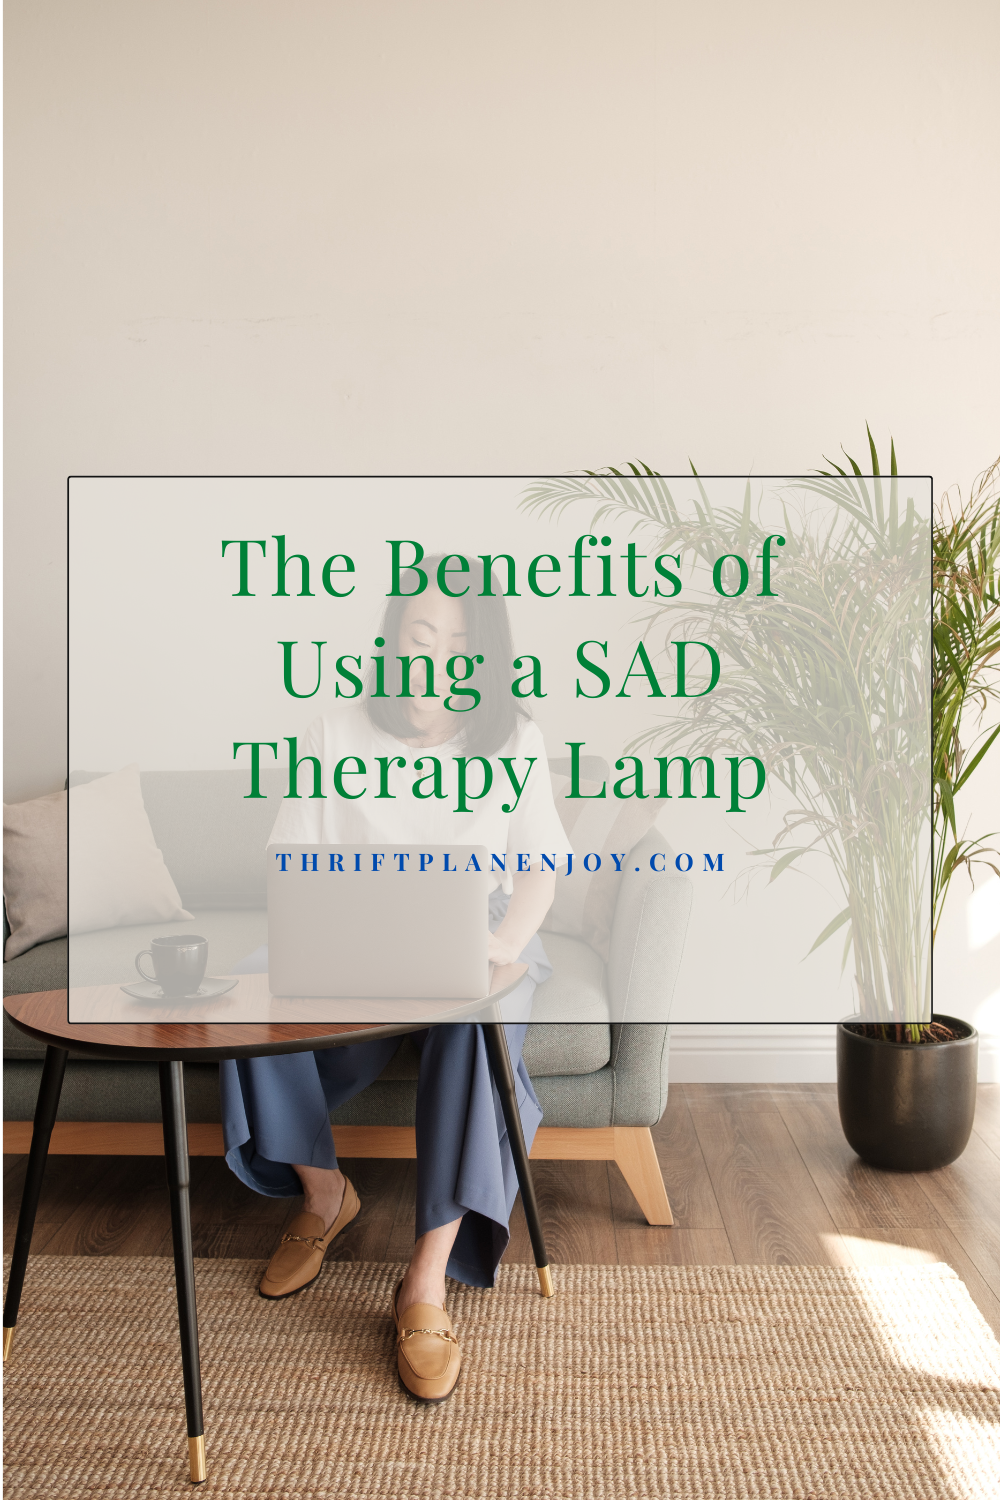 The Benefits of Using a SAD Therapy Lamp